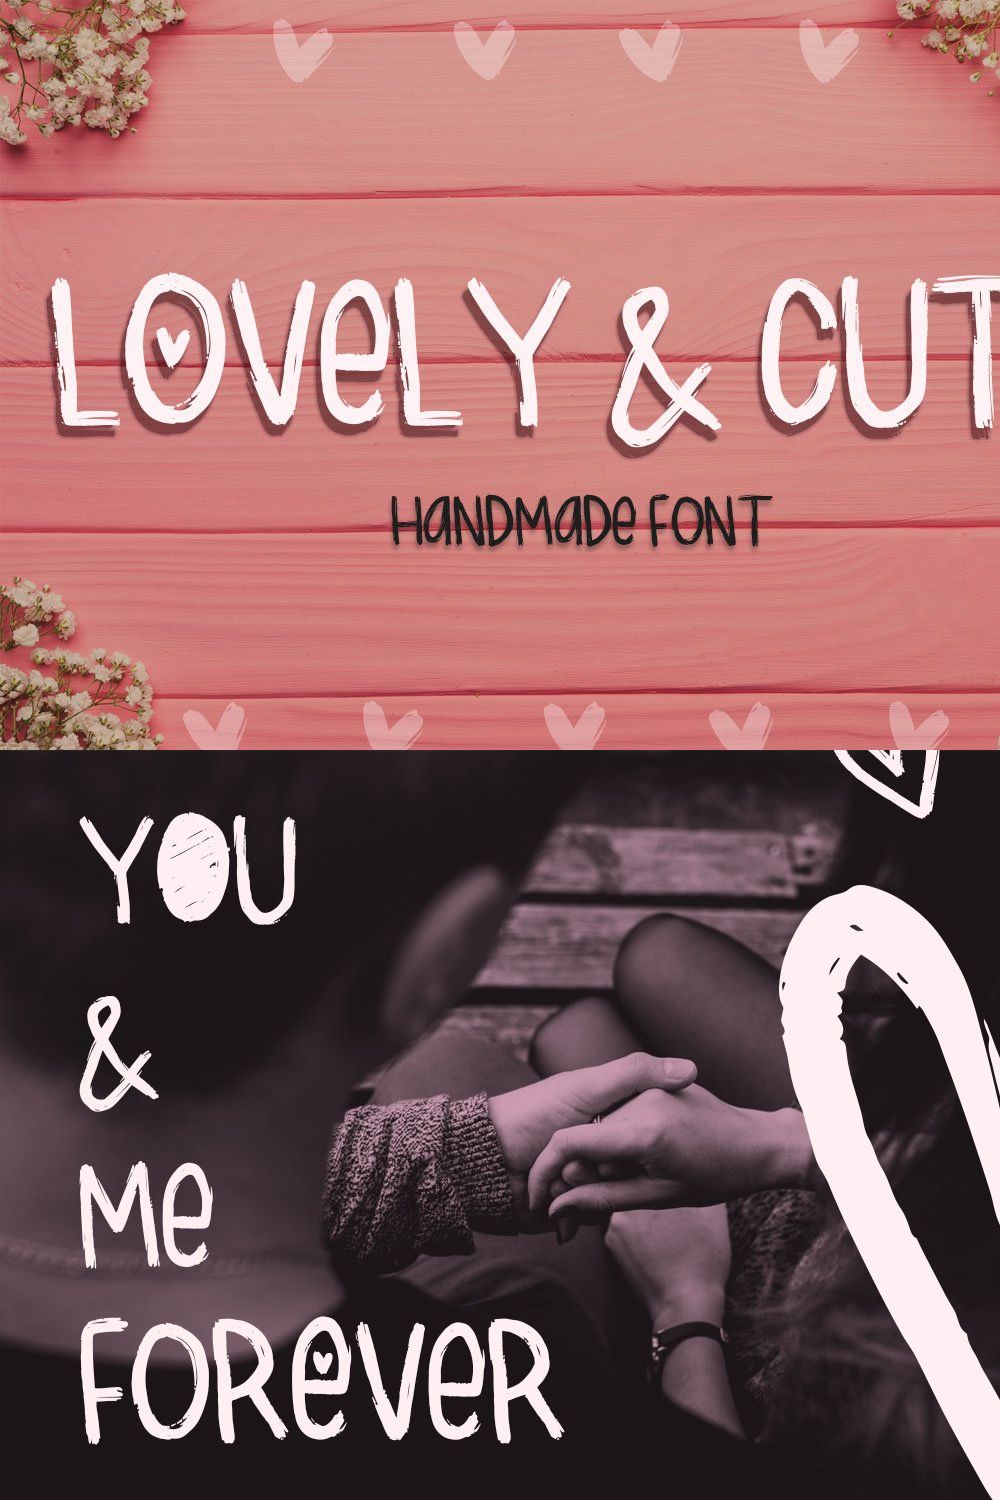 Lovely & Cute - 3 Handmade fonts! pinterest preview image.